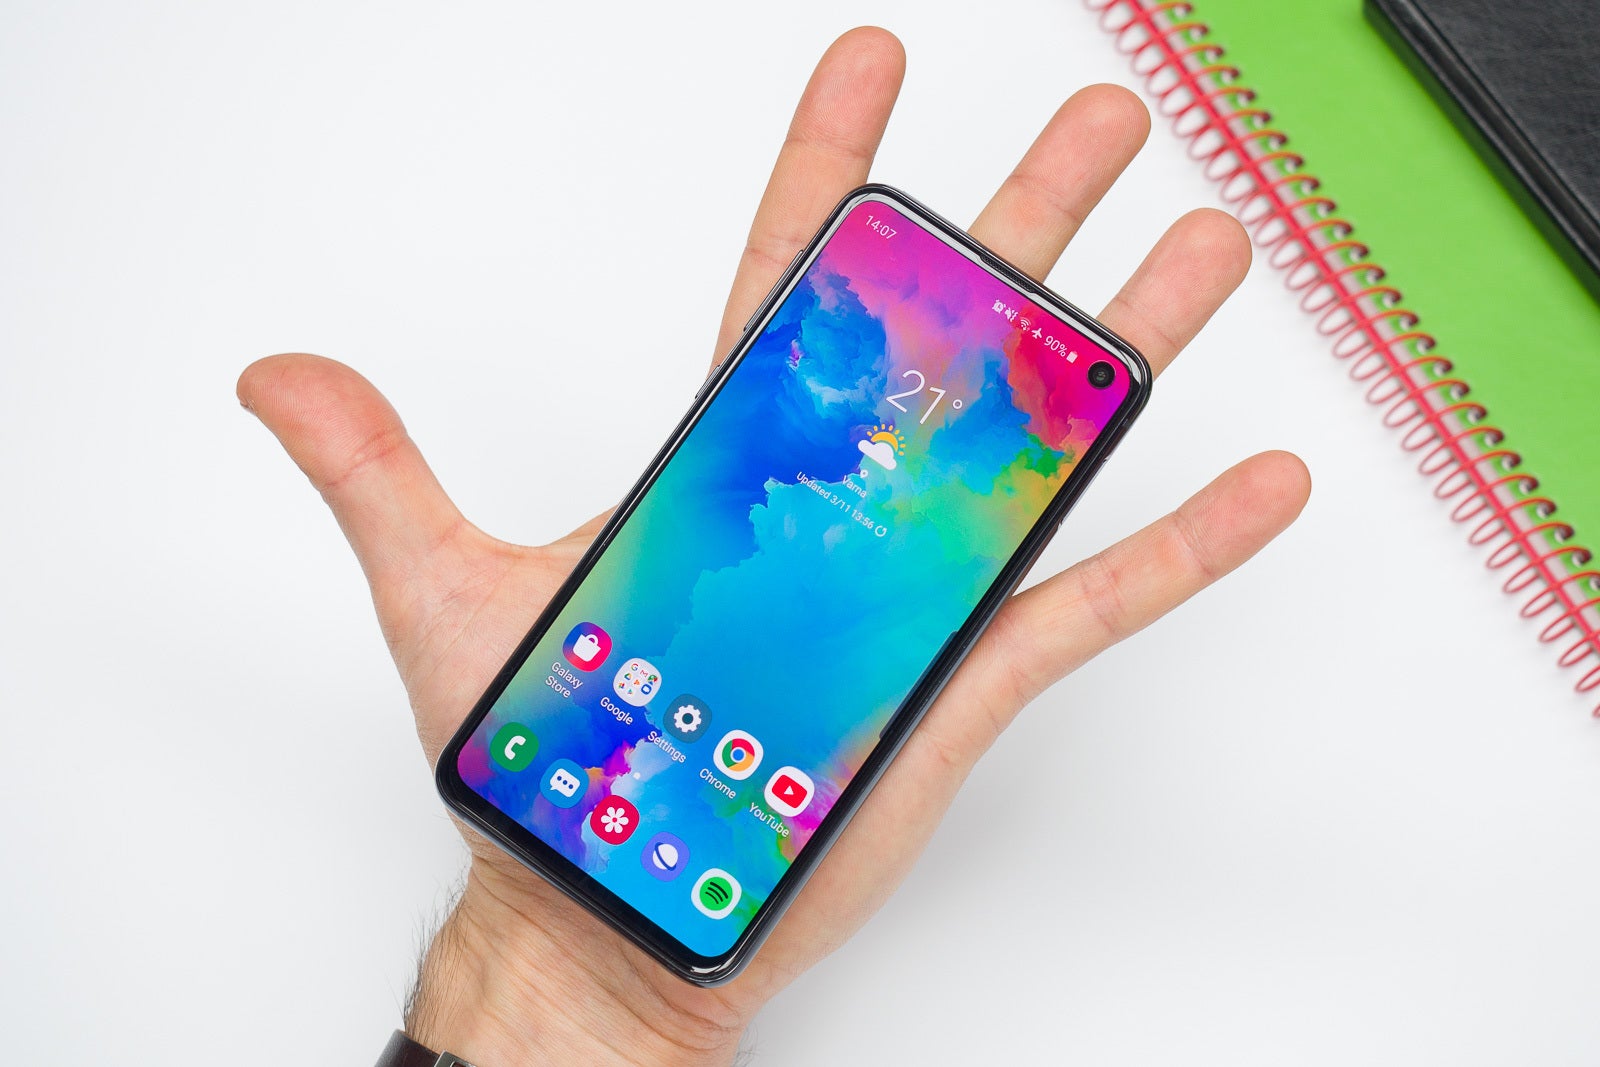 Samsung Galaxy S10e - Opinion: Give me back my compact Android phone!